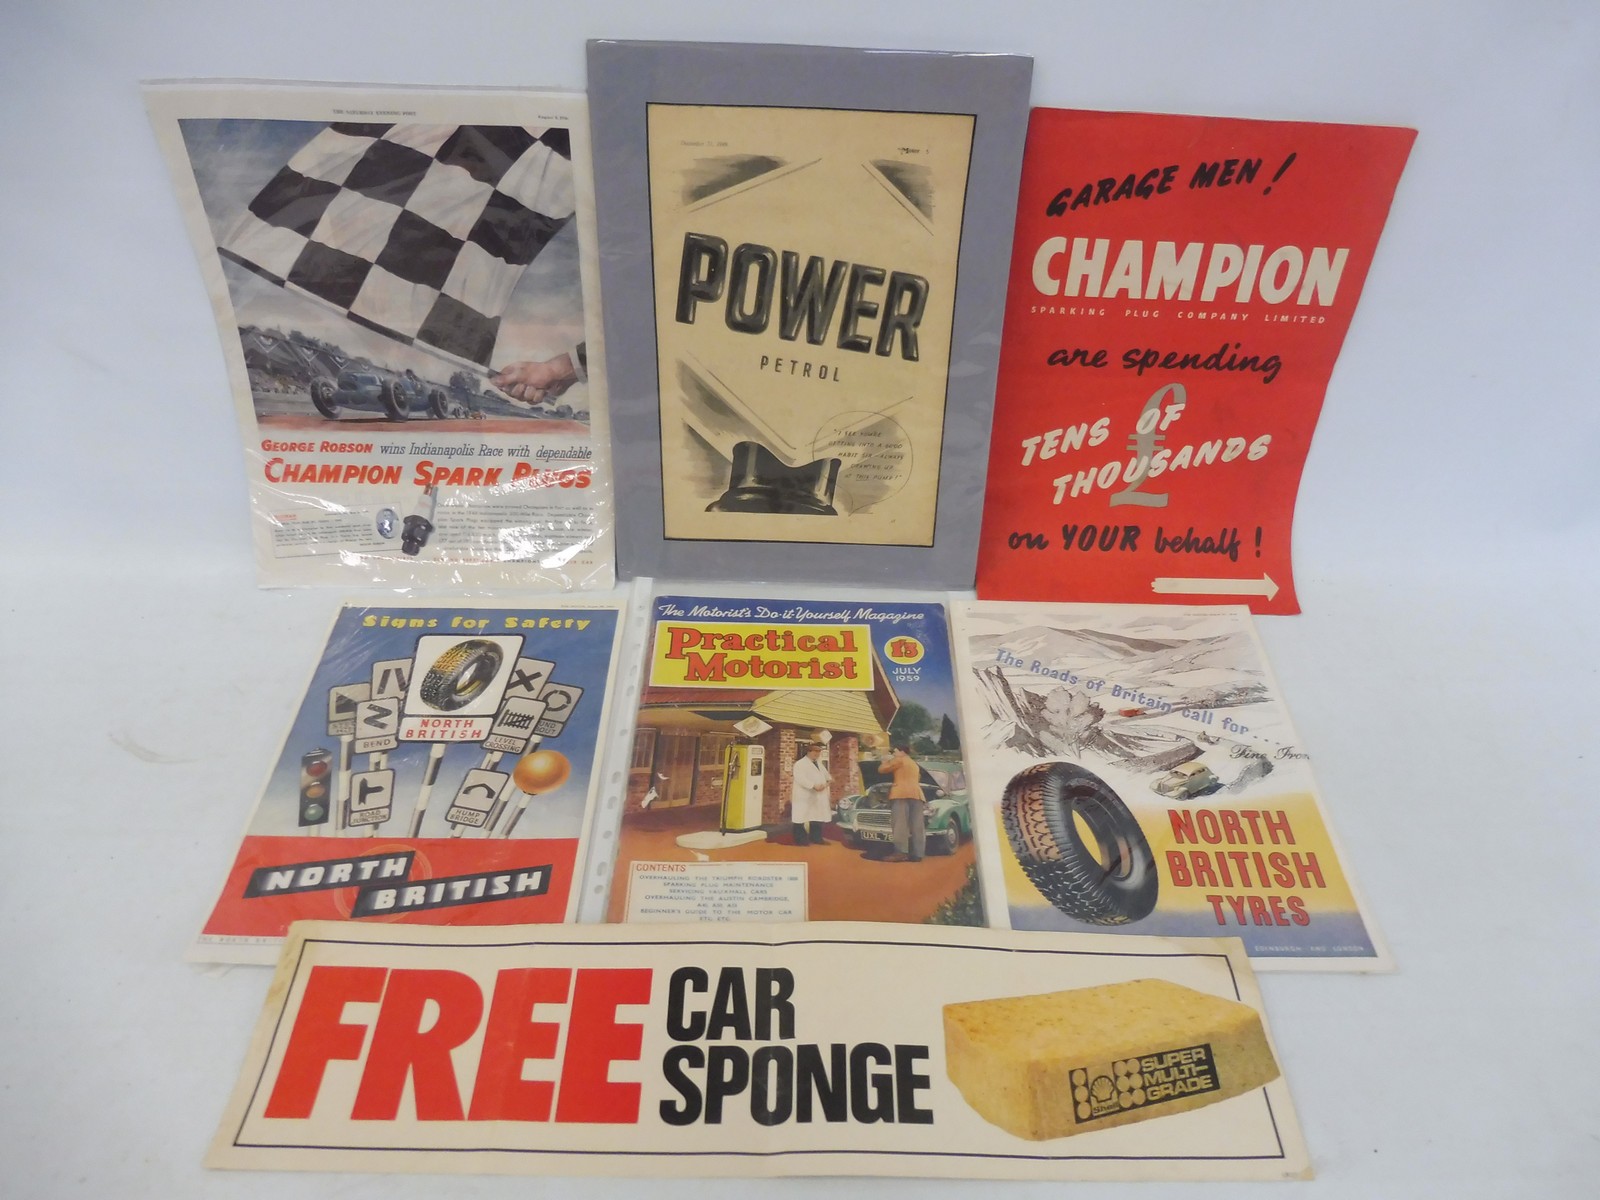 A collection of assorted ephemera and advertising including a booklet for Champion spark plugs etc.